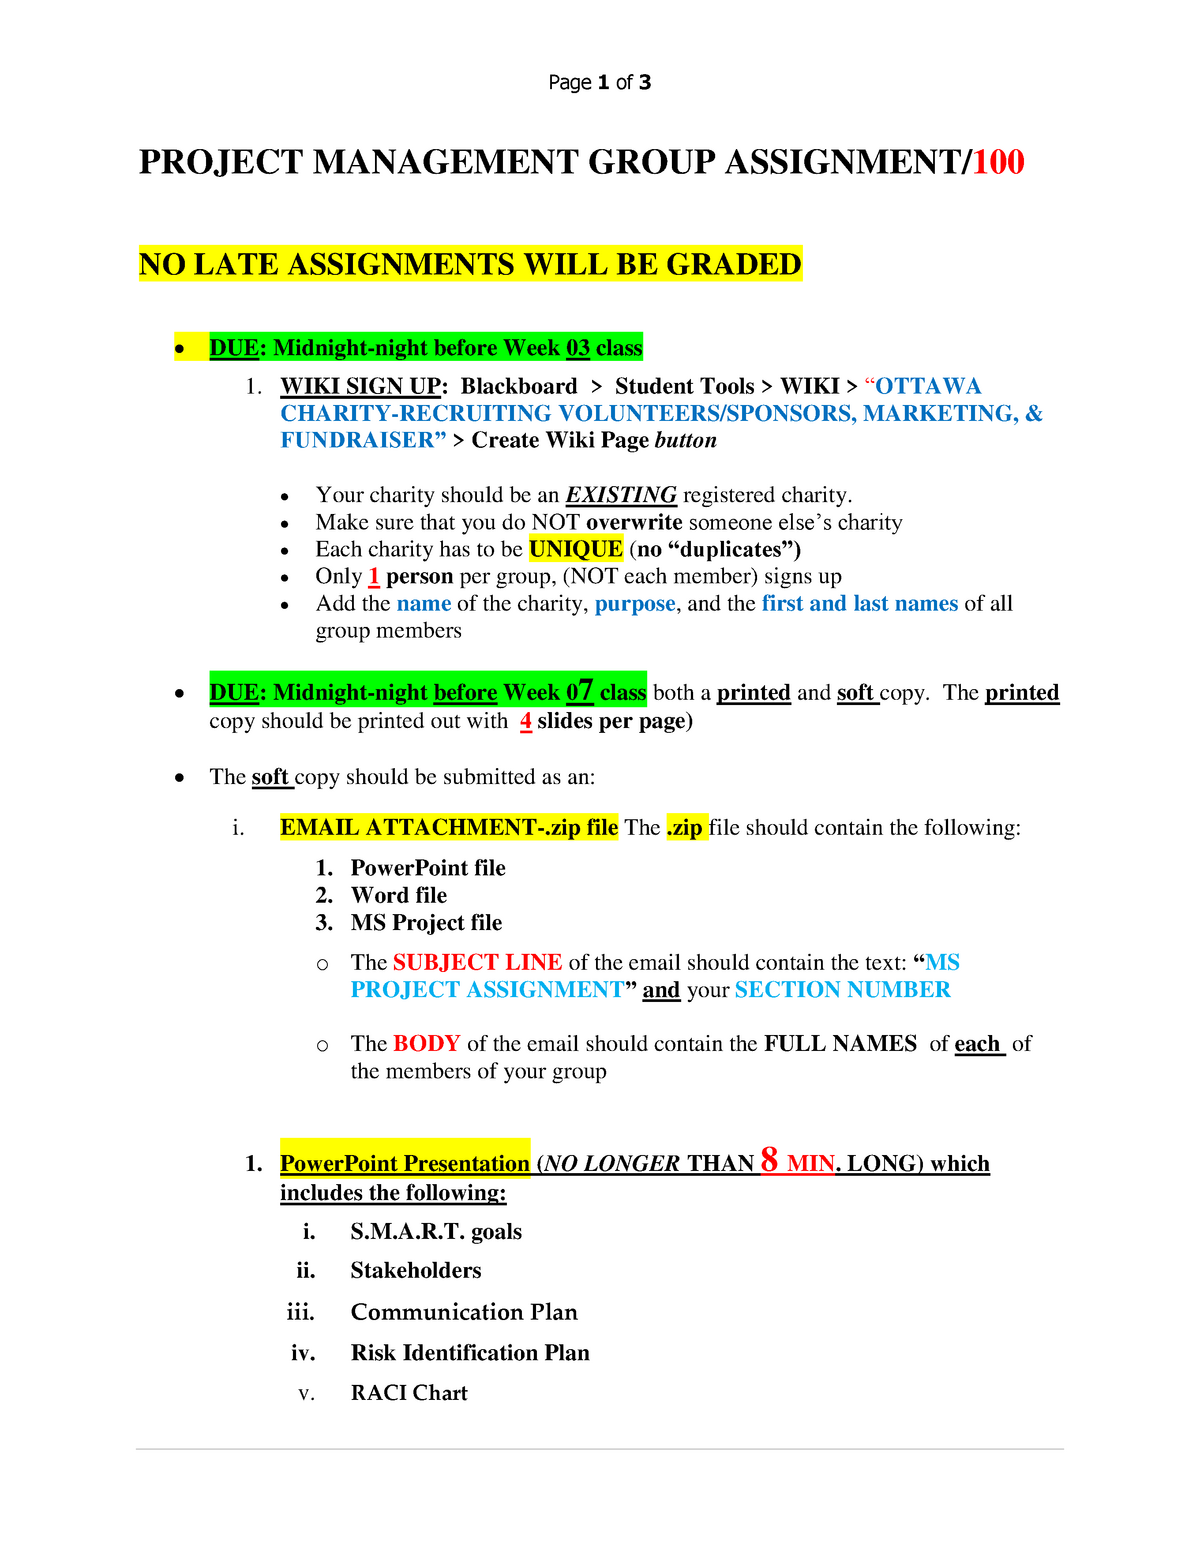 example of project management assignment